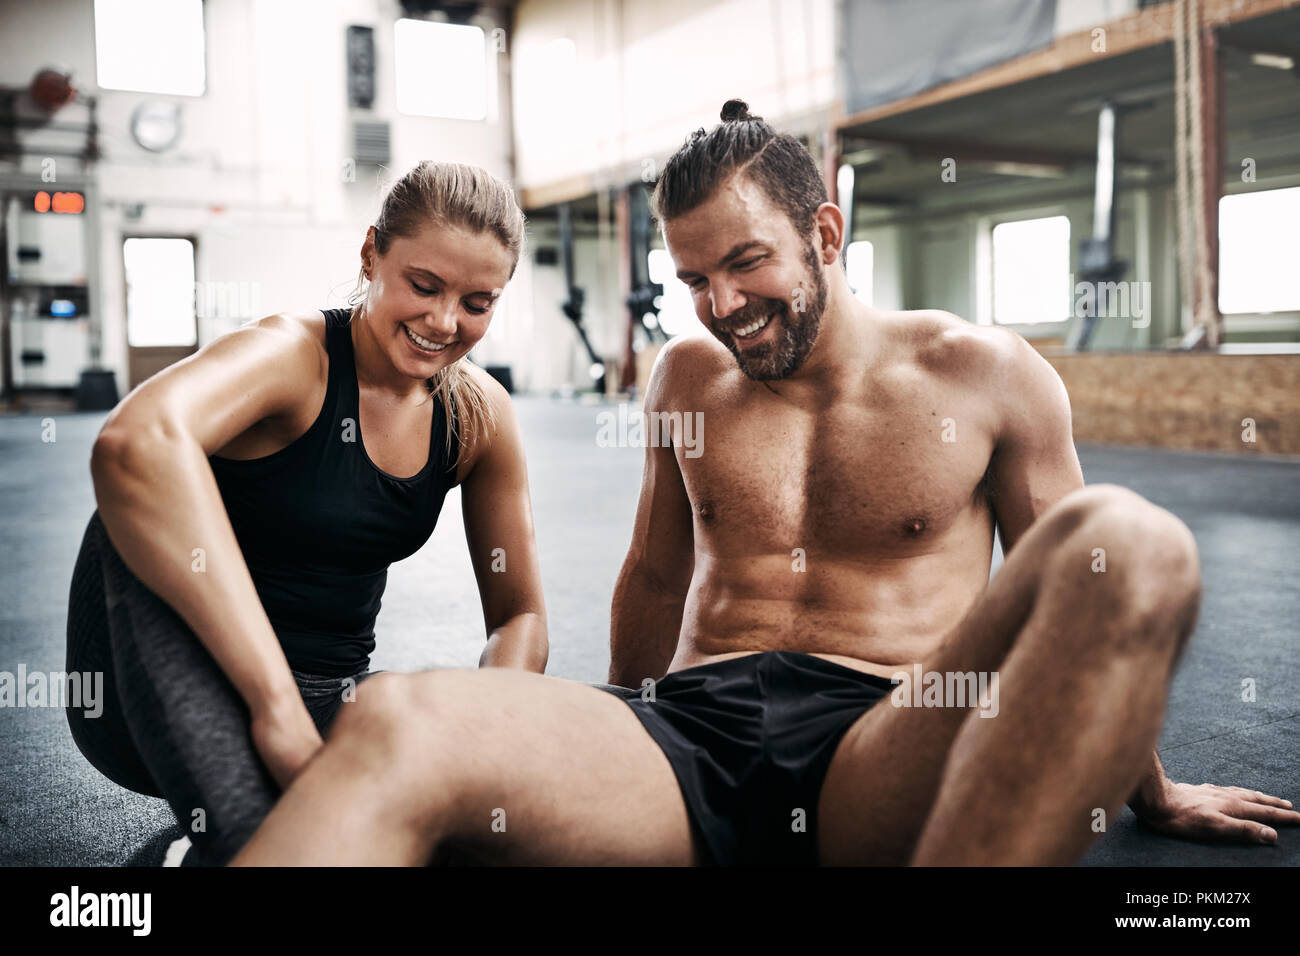 Fit young couple in sportswear sitting on the floor of a gym talking together after a workout session Stock Photo